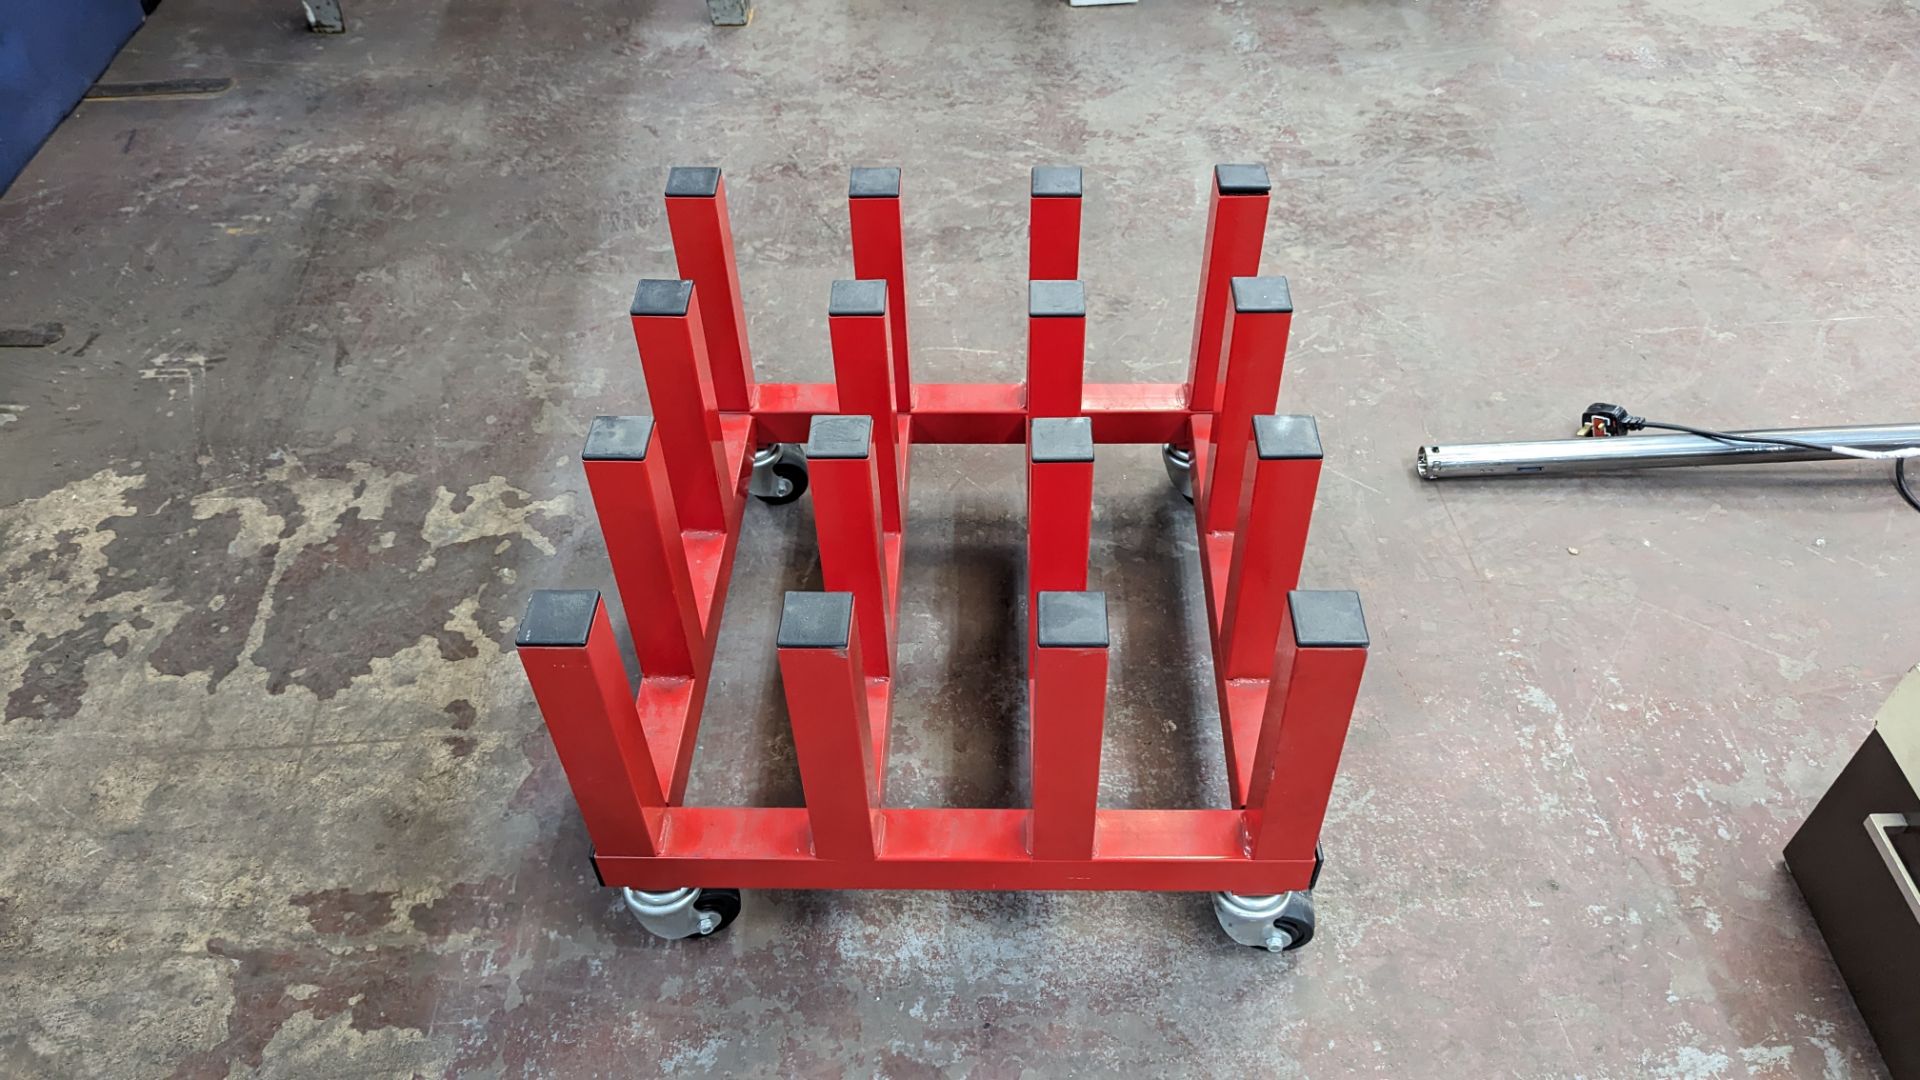 Mobile 16 red materials handling trolley with 16 "stumps" - Image 5 of 5